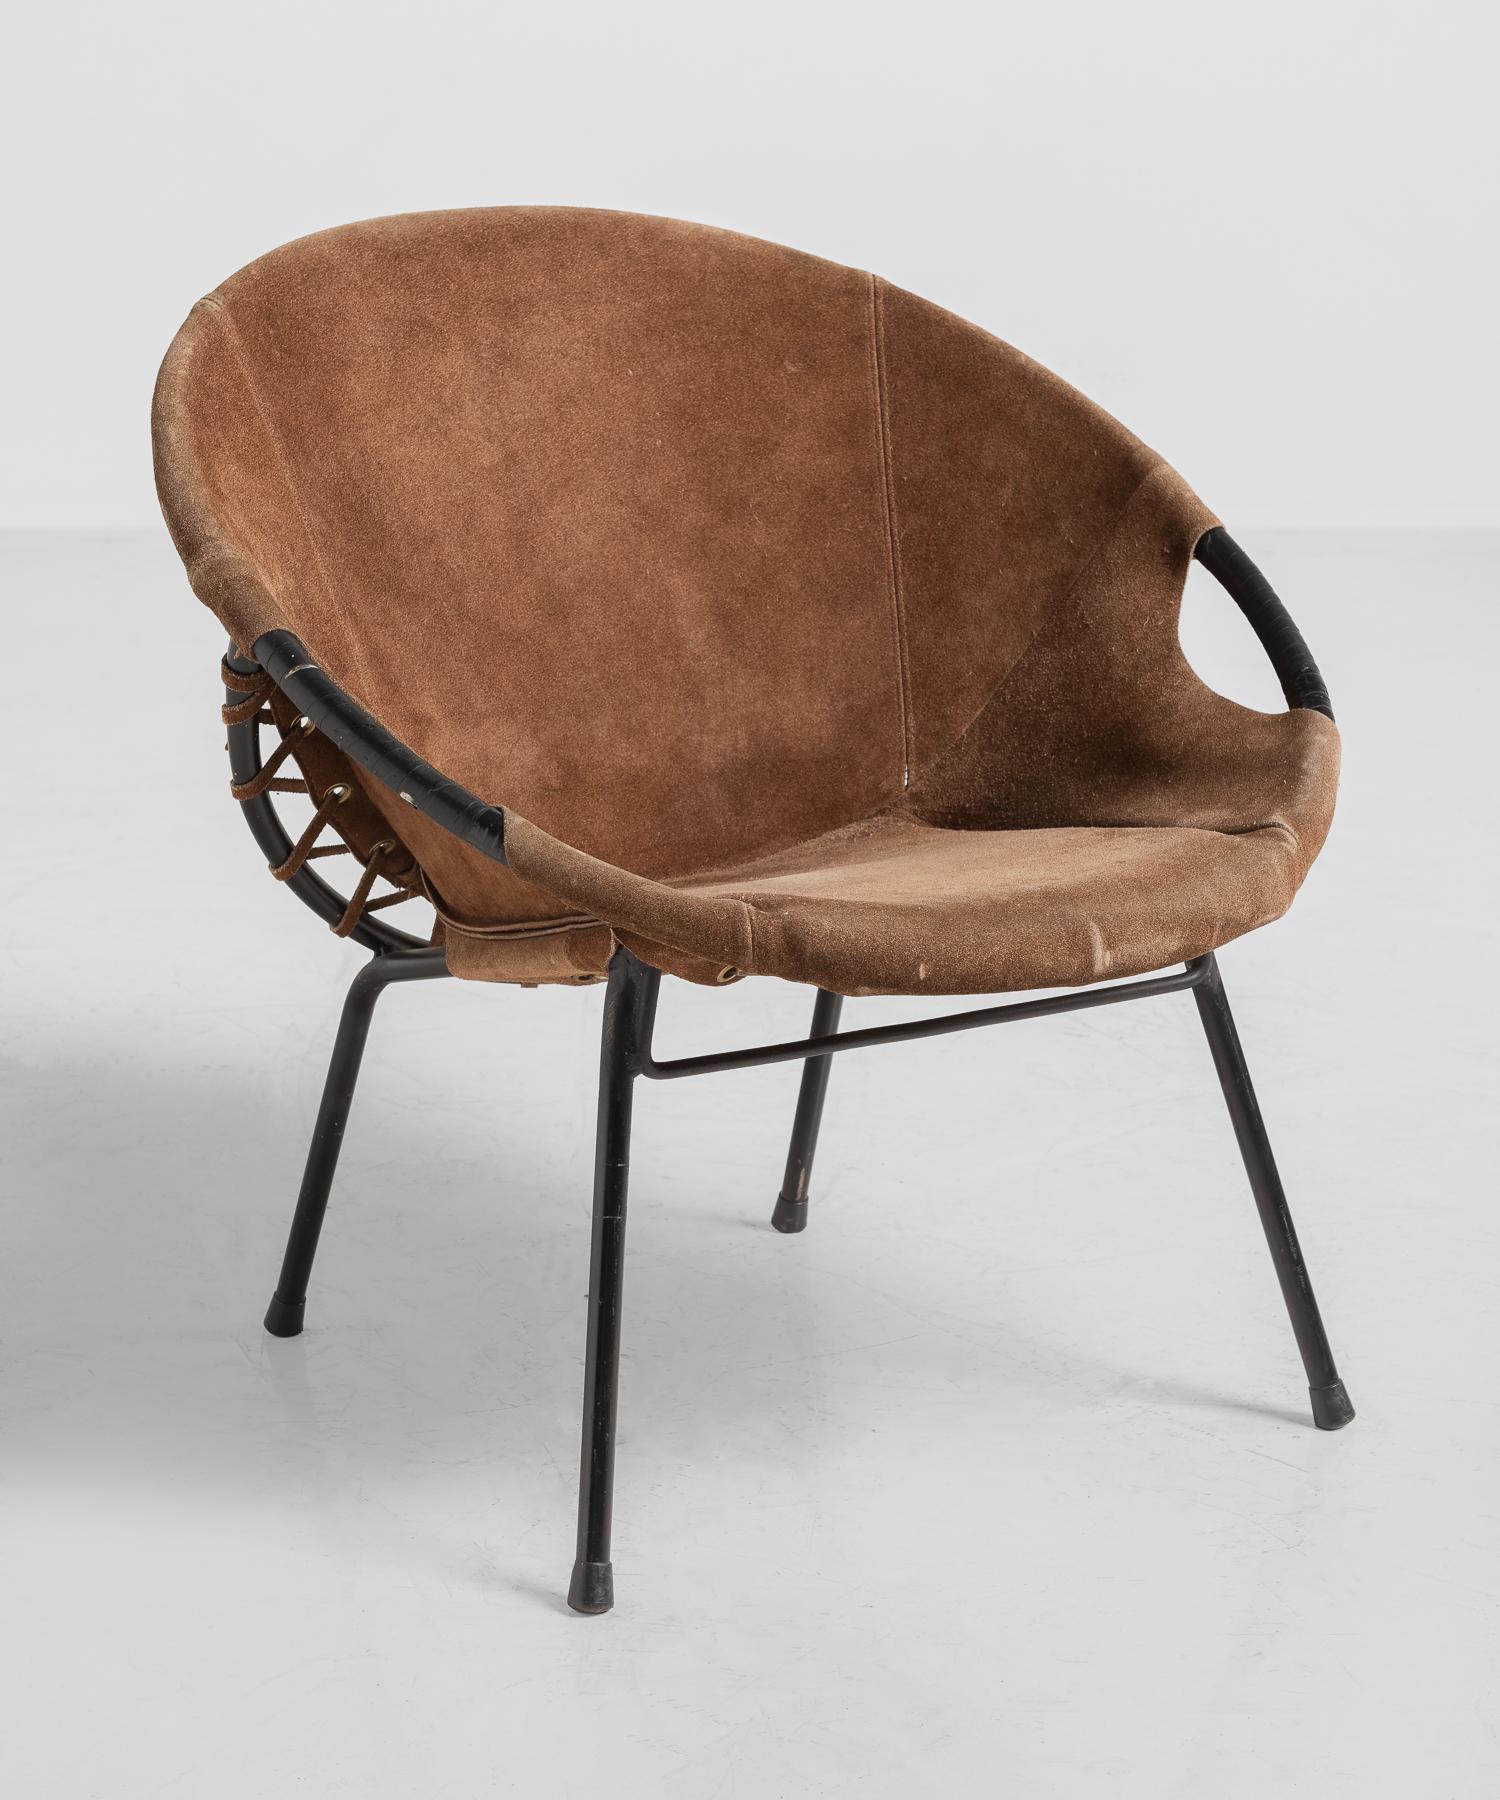 Suede hoop chair, Germany, circa 1950.

Tubular metal frame with original brown suede leather seat.